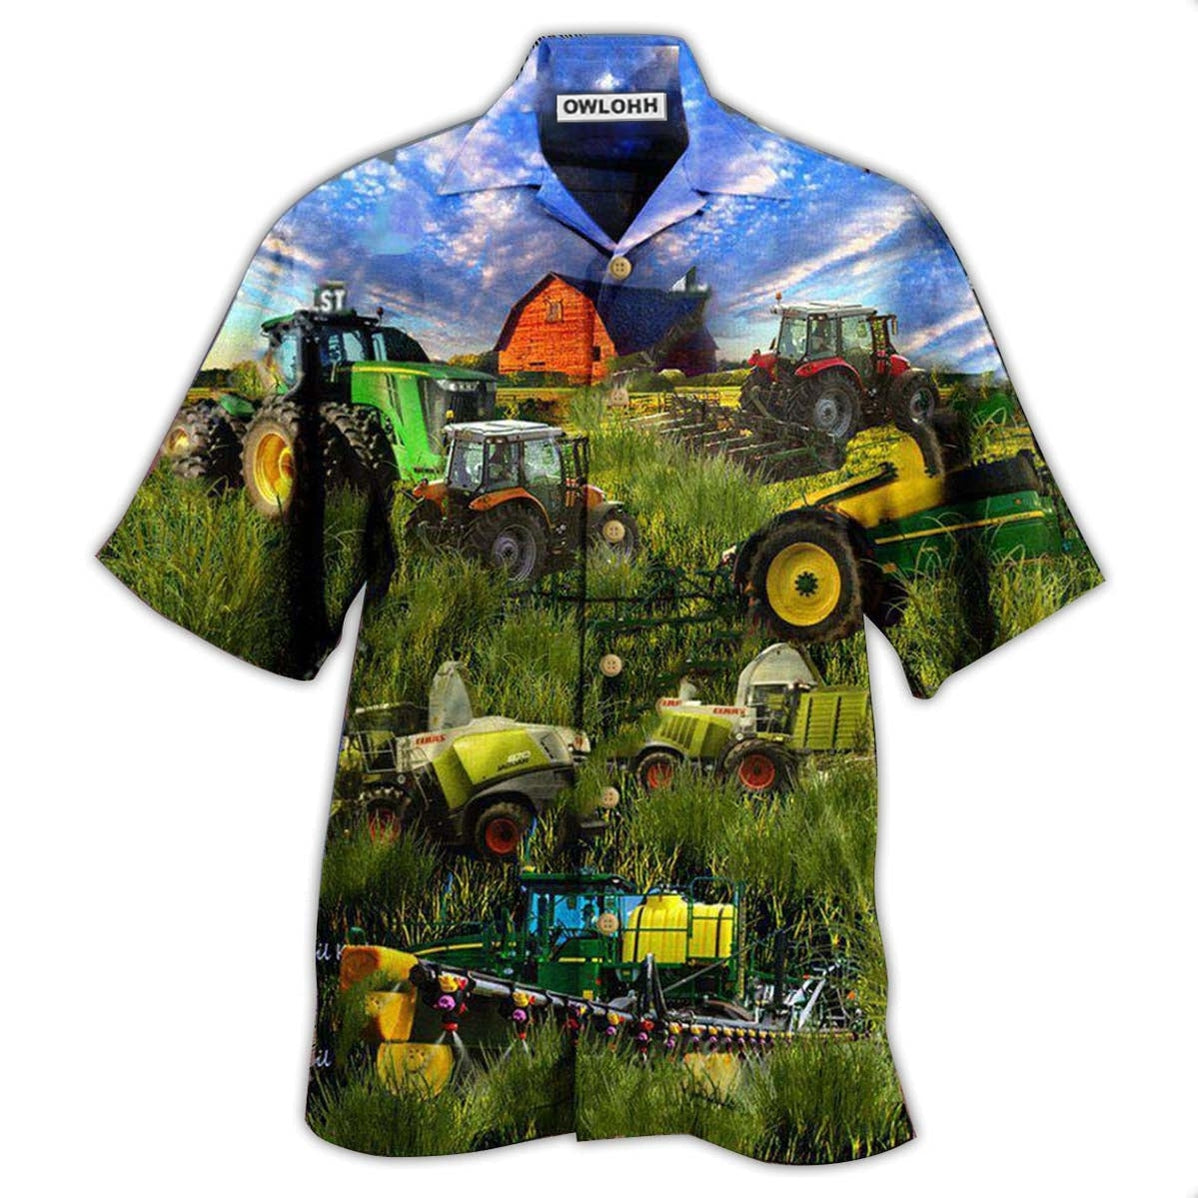 Hawaiian Shirt / Adults / S Tractor Just One More Tractor I Promise - Hawaiian Shirt - Owls Matrix LTD